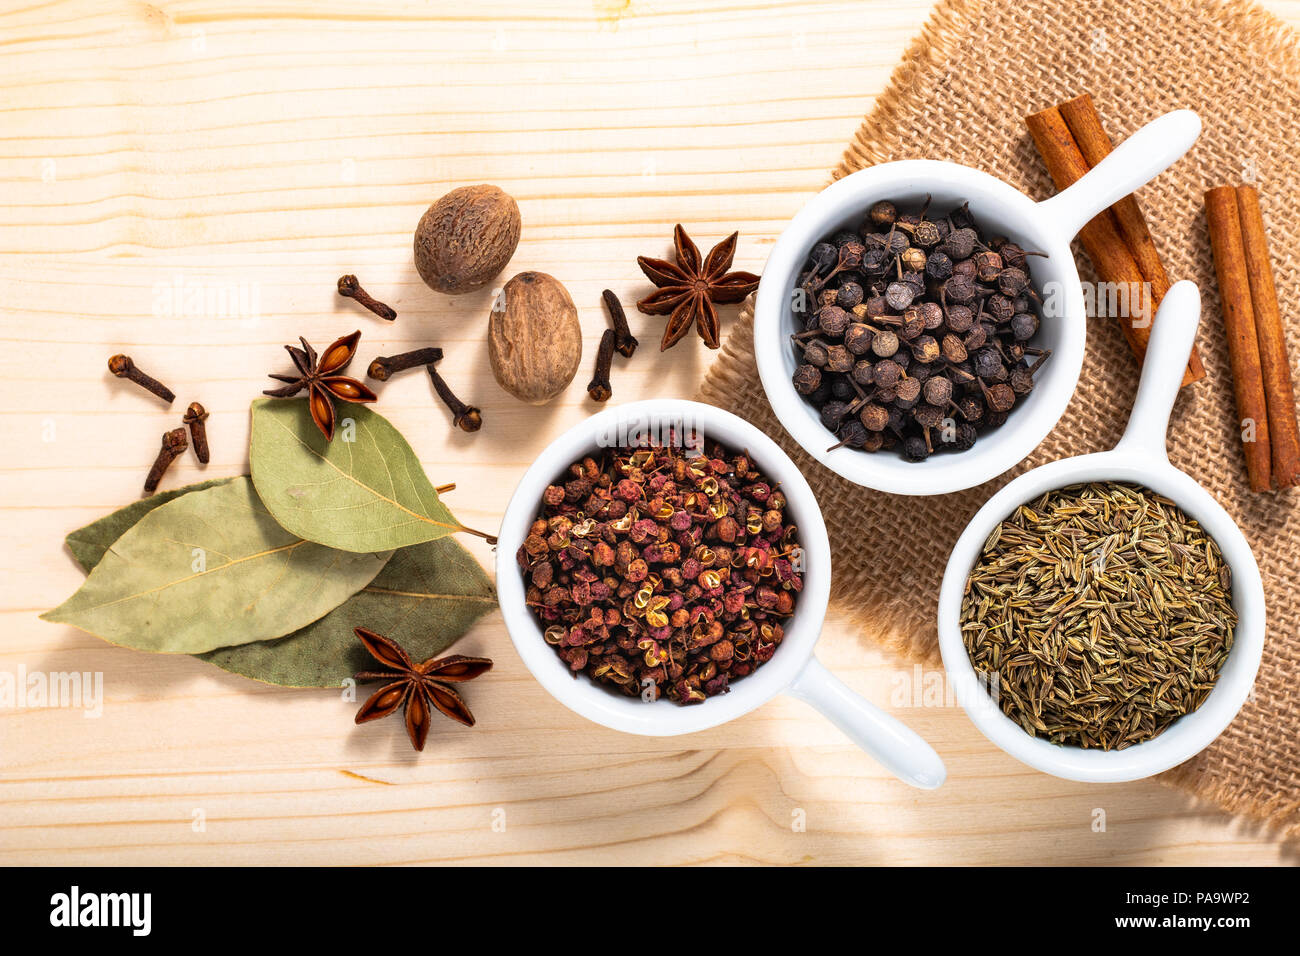 Exotic spices concept Chinese Asian Spices mix  Sichuan peppercorns, star anise pods, bay leave, black peppers, nutmegs, cloves and cinnamon sticks wi Stock Photo